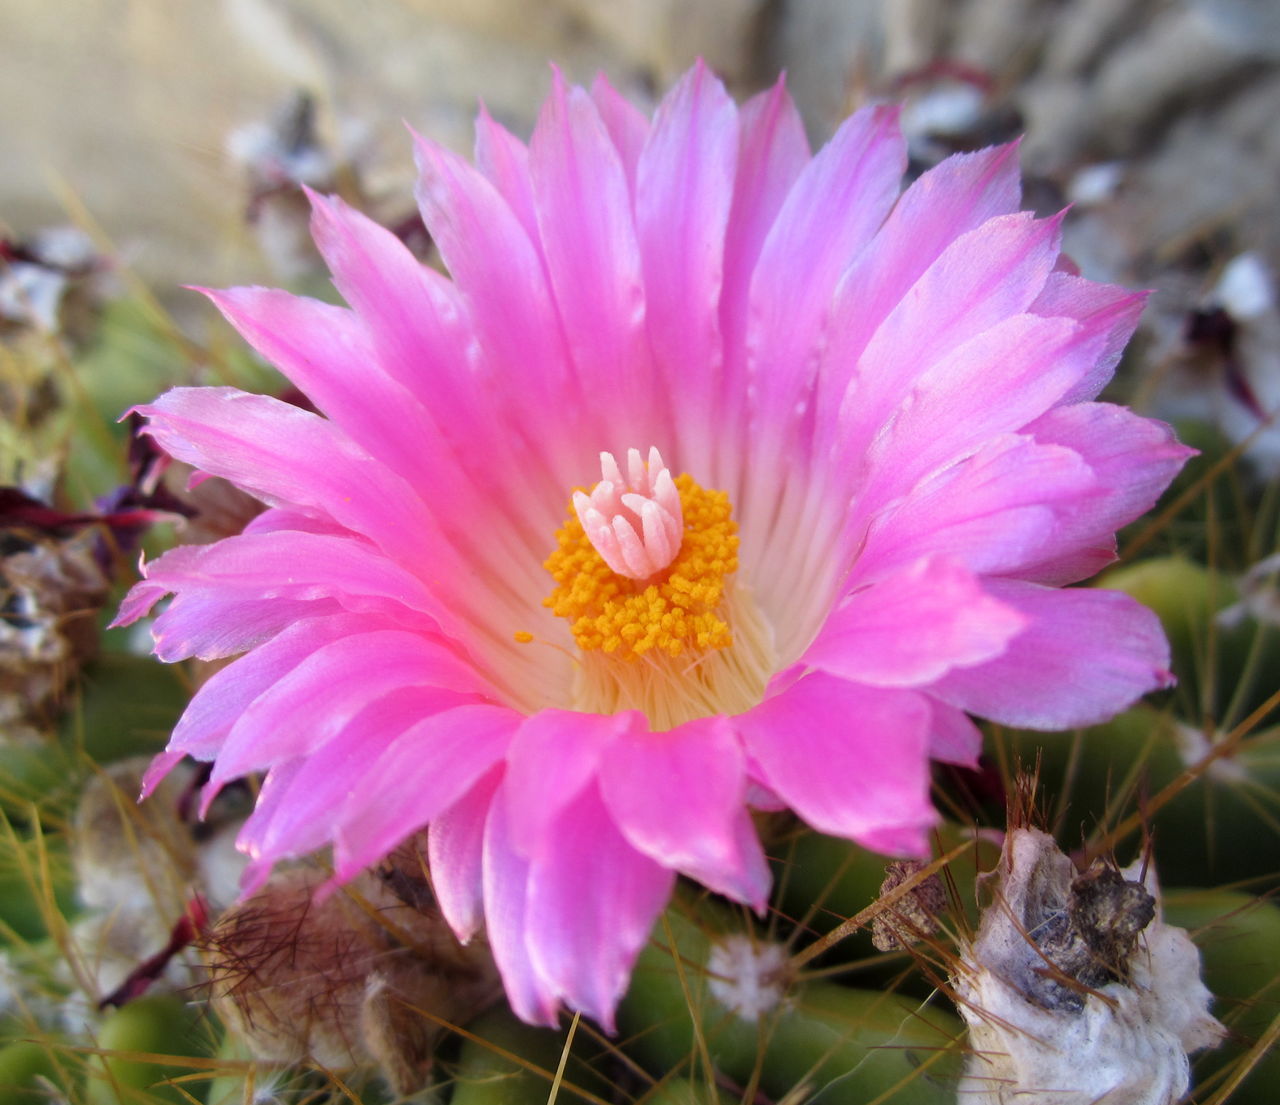 flower, flowering plant, plant, beauty in nature, freshness, pink, petal, close-up, flower head, nature, fragility, inflorescence, cactus, growth, macro photography, pollen, no people, animal, outdoors, focus on foreground, animal wildlife, animal themes, blossom, springtime, day